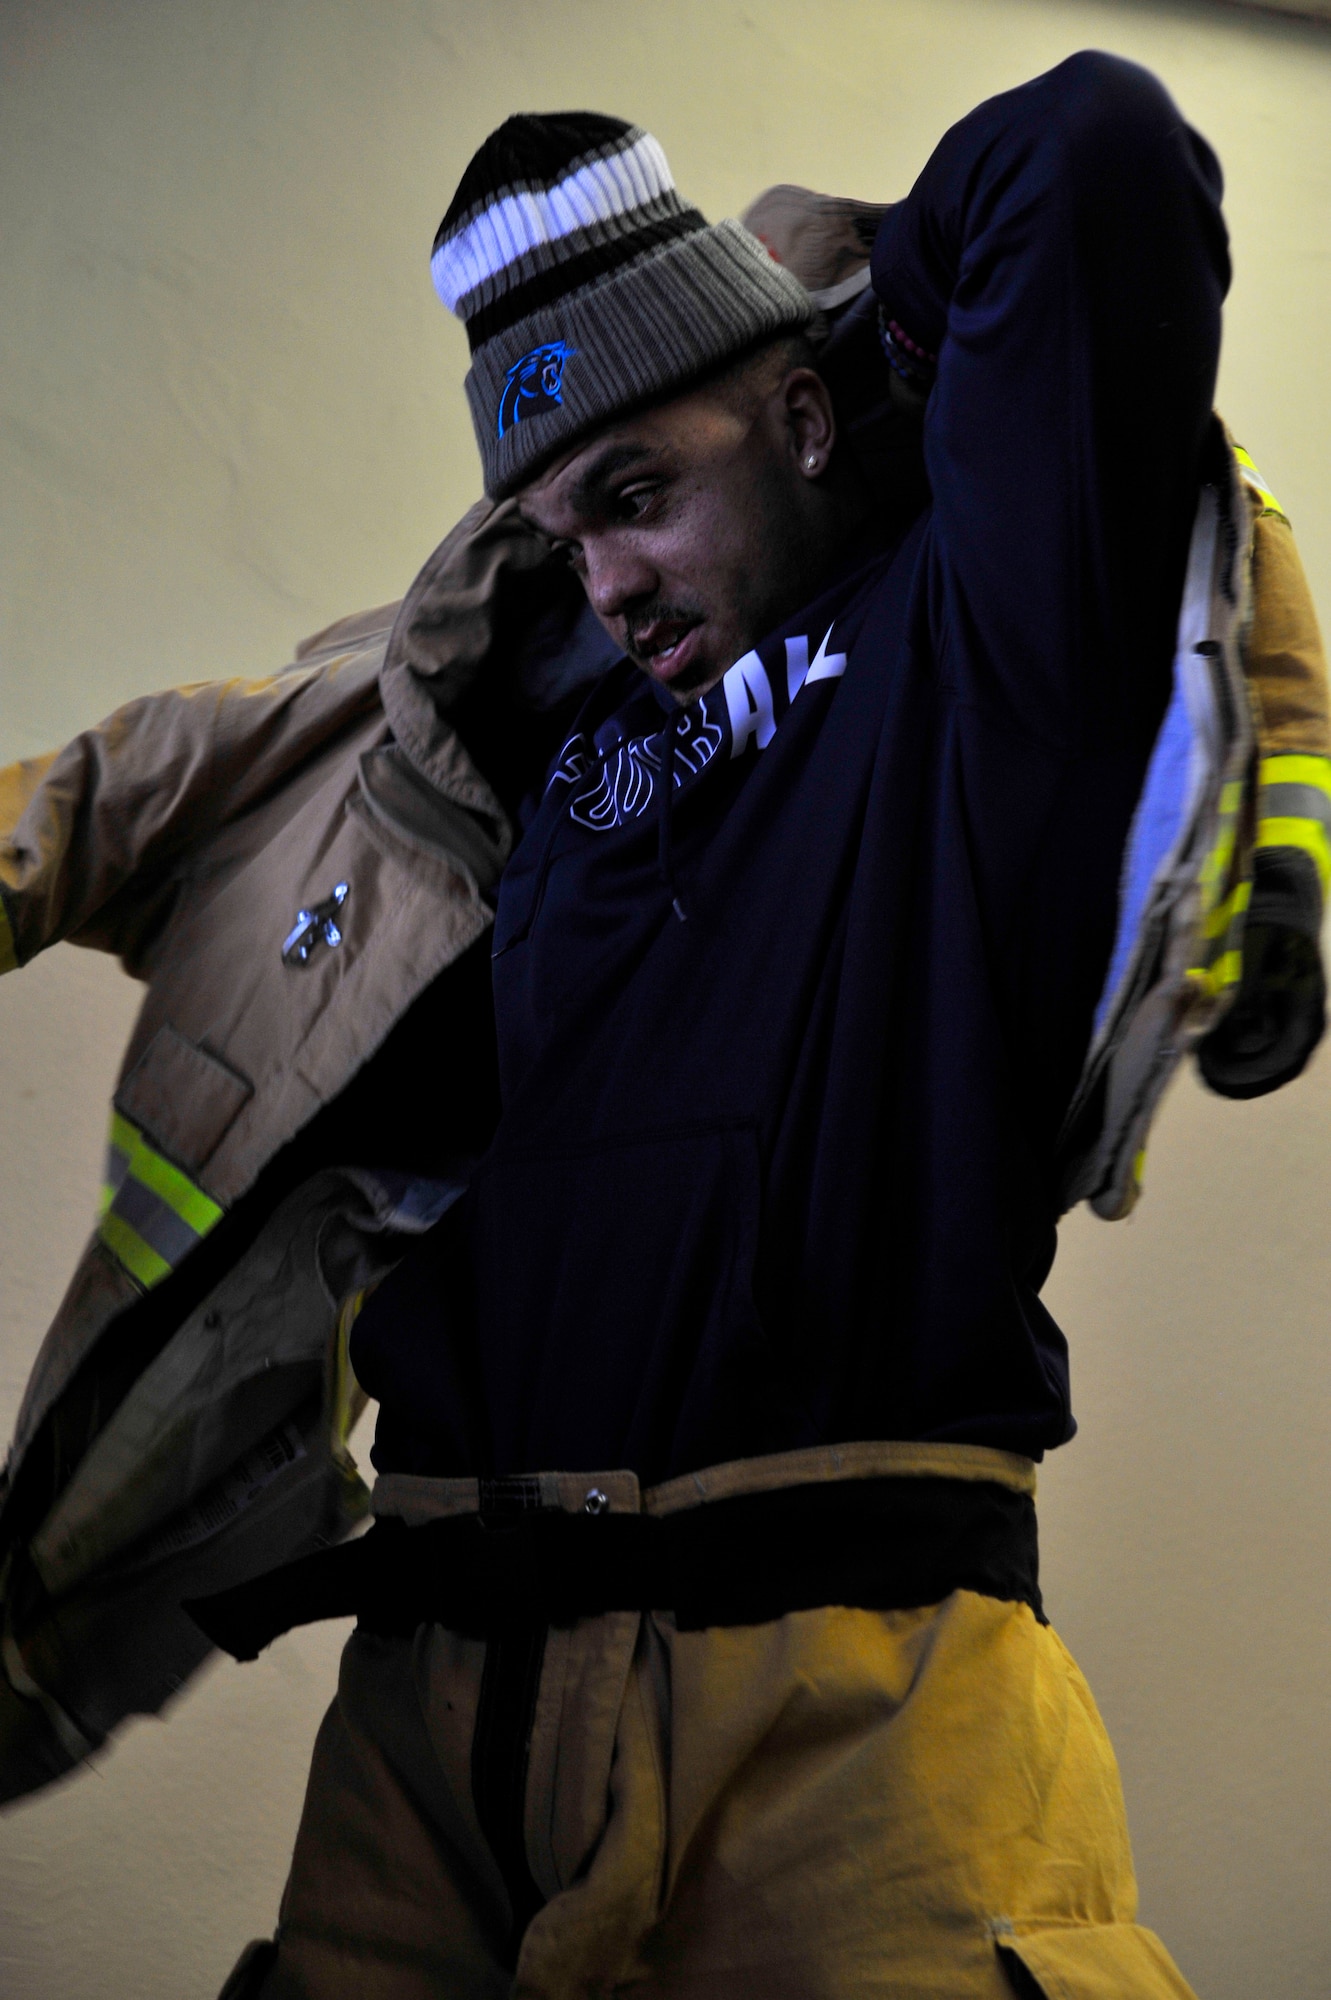 Dean Marlowe, Carolina Panthers safety, tries on fire protection gear during a visit to the 86th Civil Engineer Squadron Fire Station one on Ramstein Air Base, Germany, Mar. 7, 2017. During the visit by the Carolina Panthers, several players and cheerleaders toured units located in the local Kaiserslautern Military Community. (U.S. Air Force photo by Airman 1st Class D. Blake Browning)